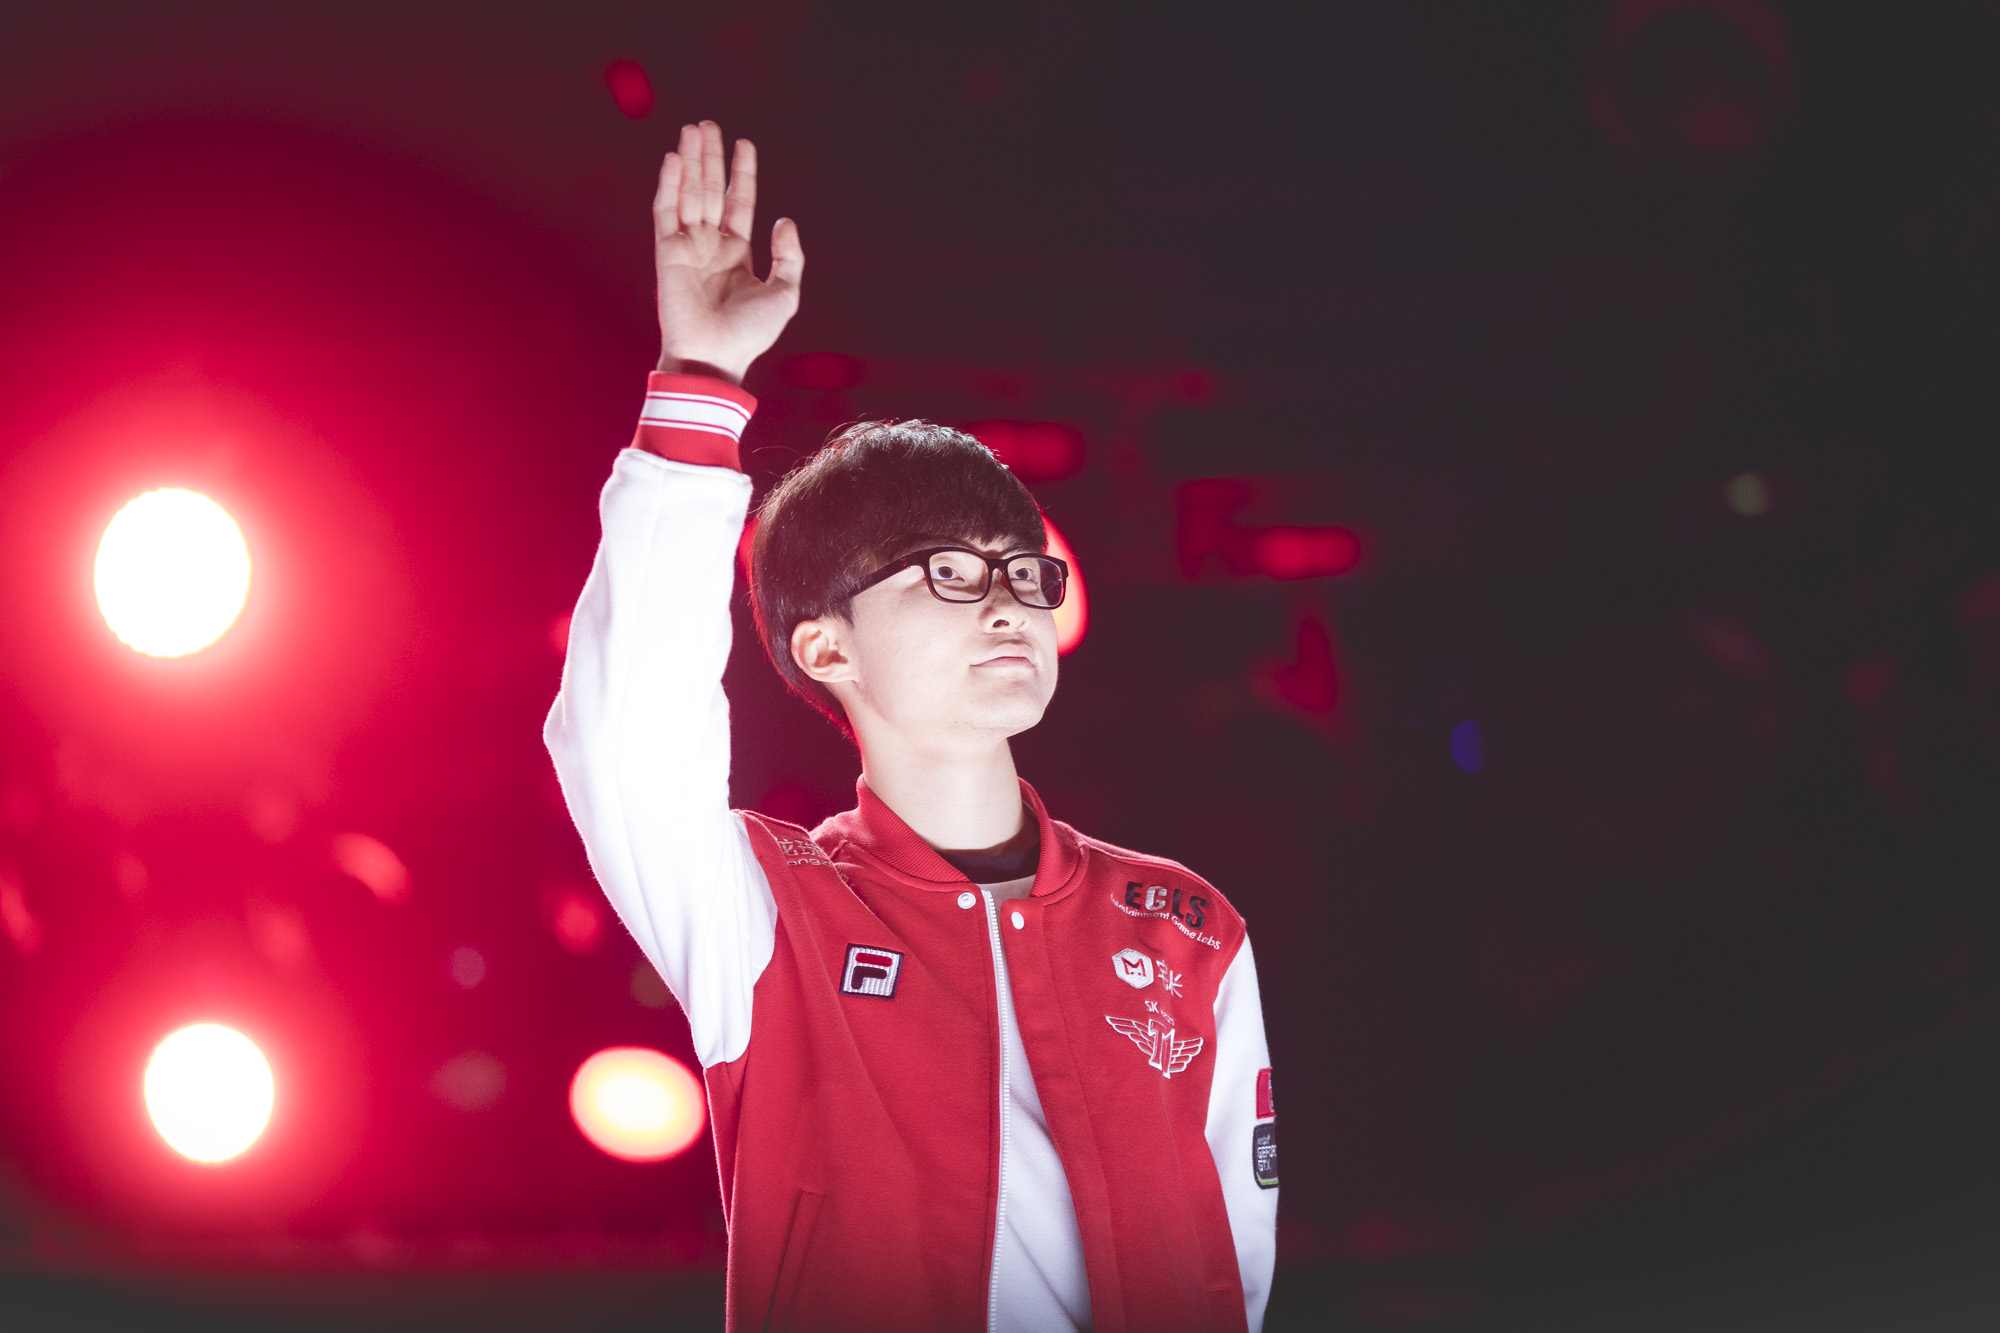 Perfection incarnate: Faker breaks yet another record at LoL Worlds ...